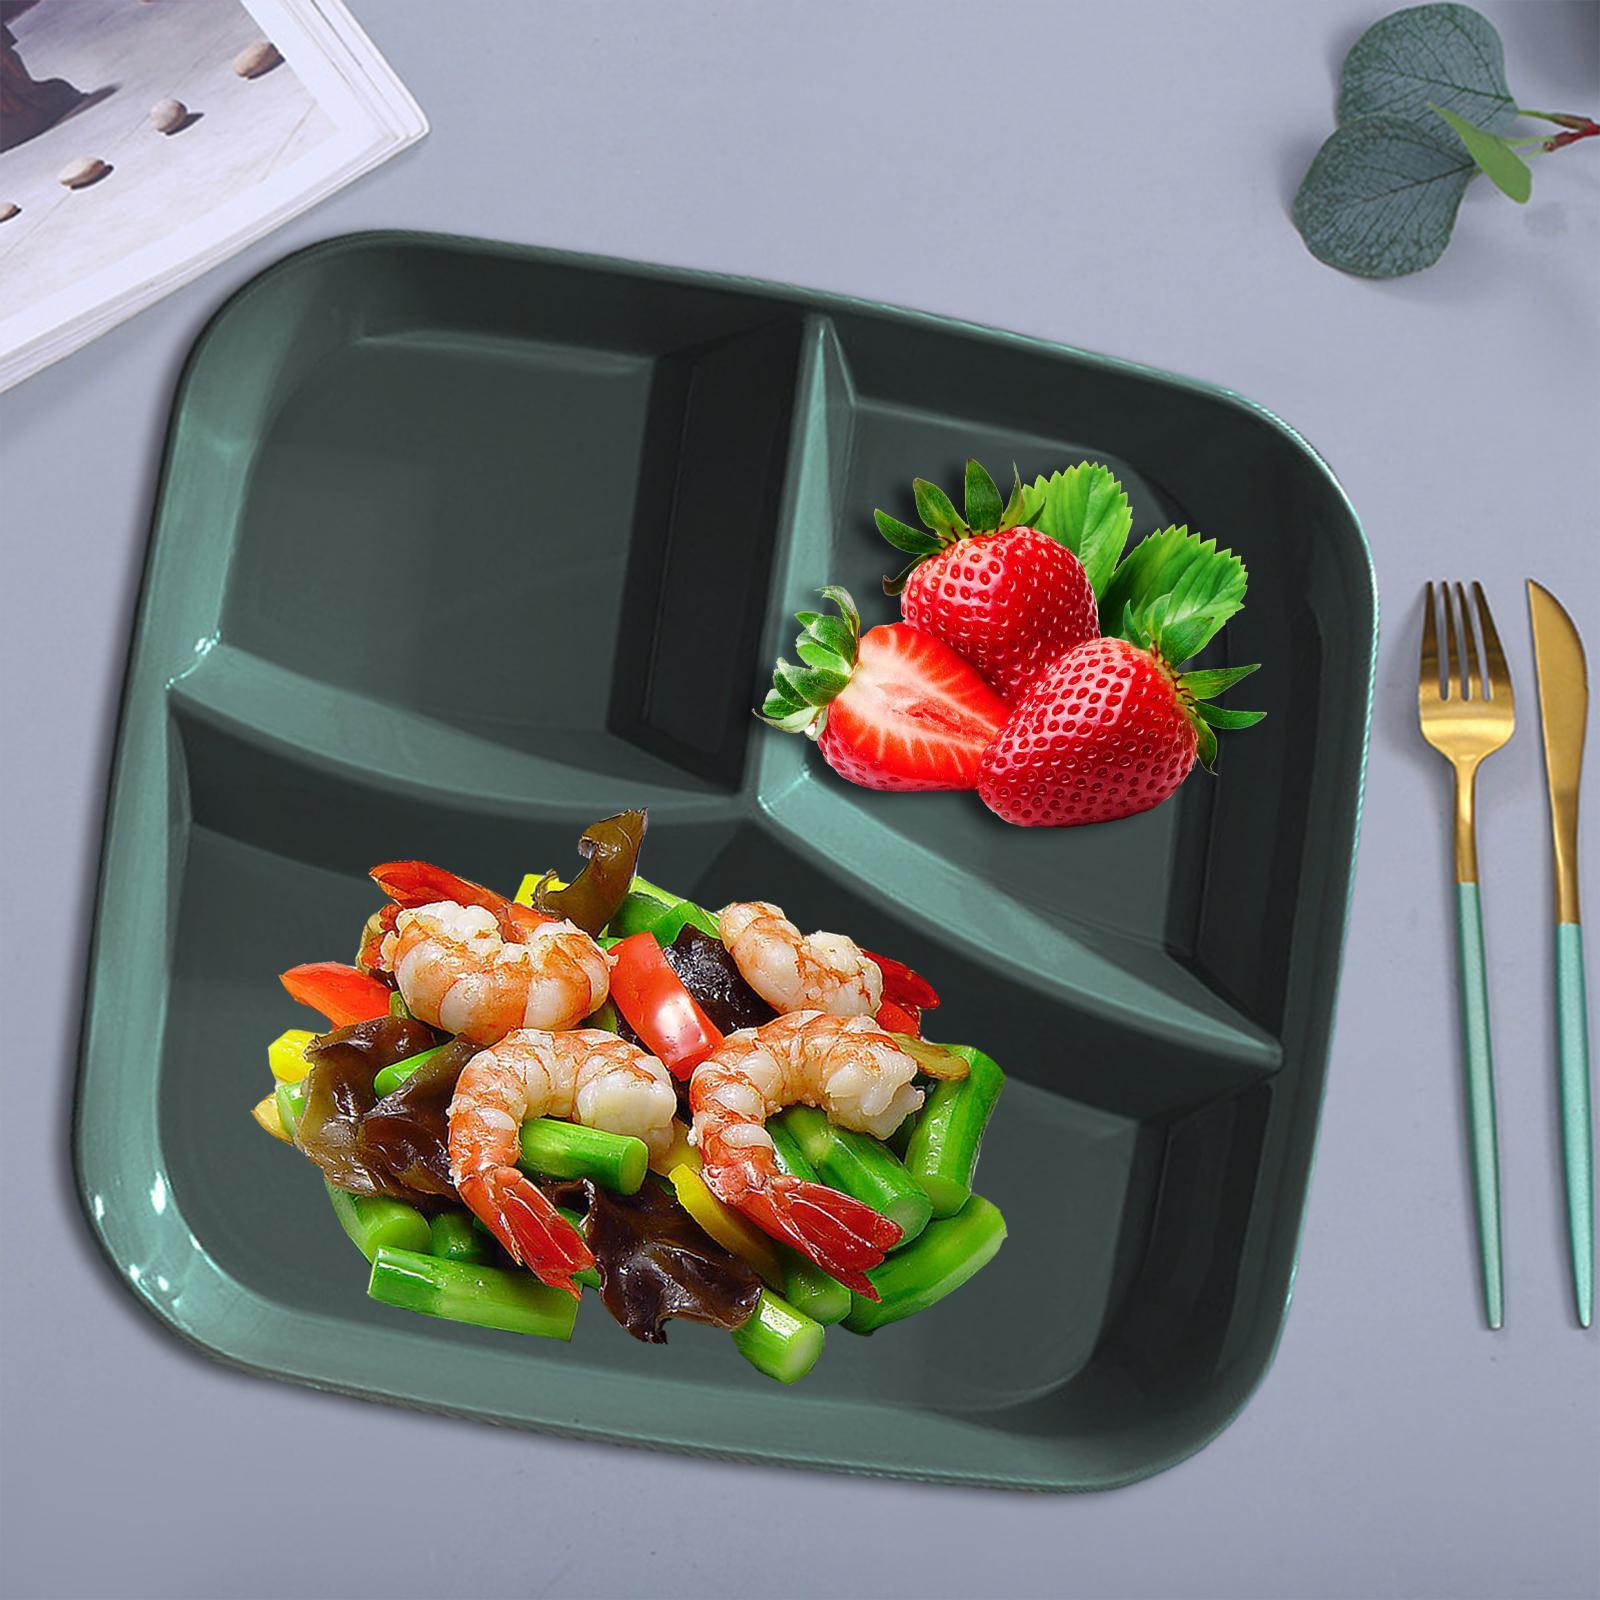 3 Compartment Dinner Plate, Food Grade PP Serving Platter, Restaurant Mess Tray for Camping, Picnics, School Lunch Dinner Sections Plates